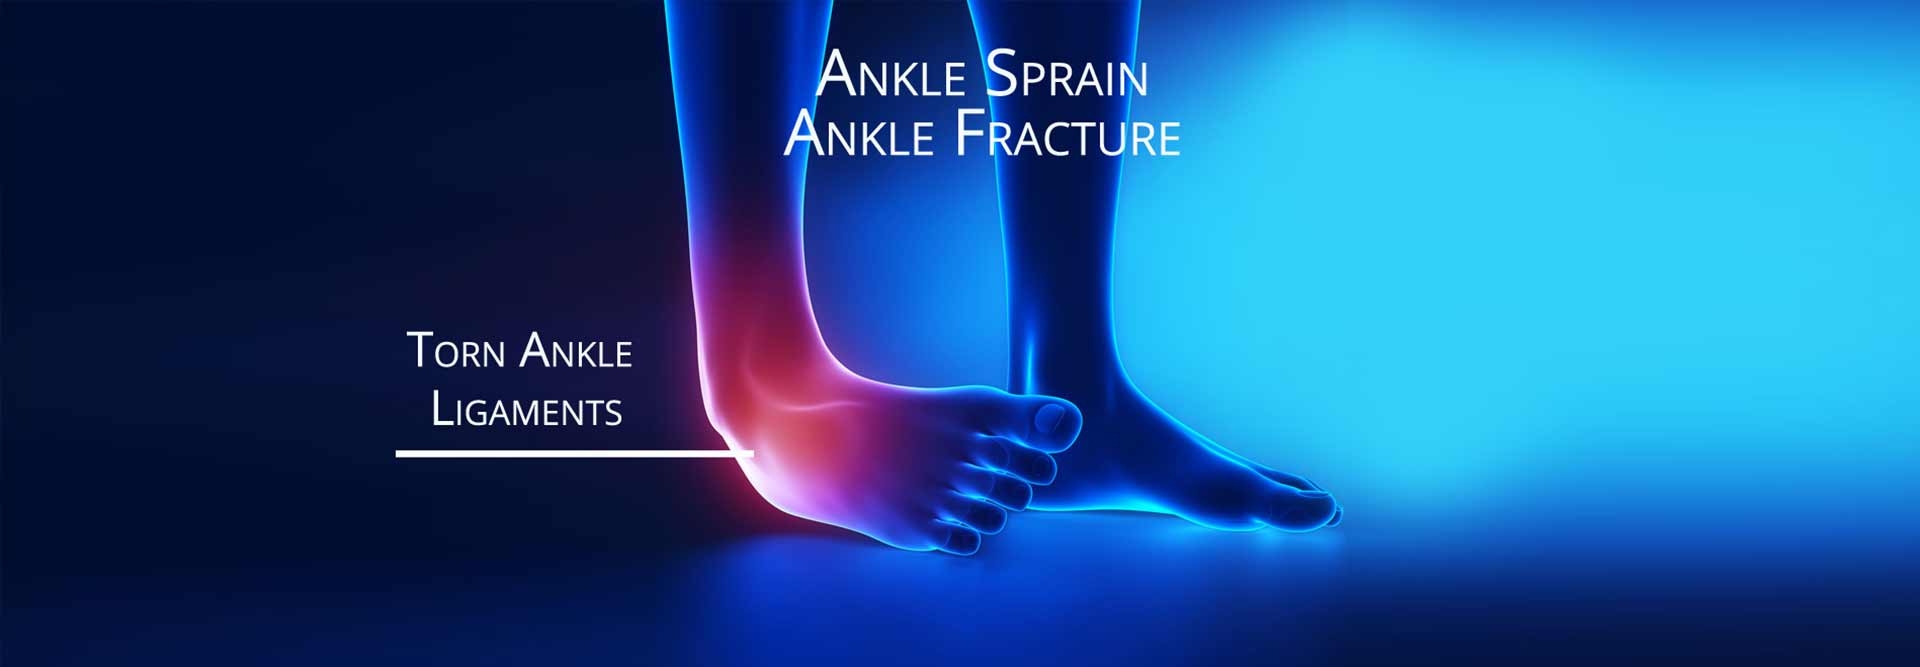 Ankle Sprain - Ankle Fracture - Torn Ligament or Tendon